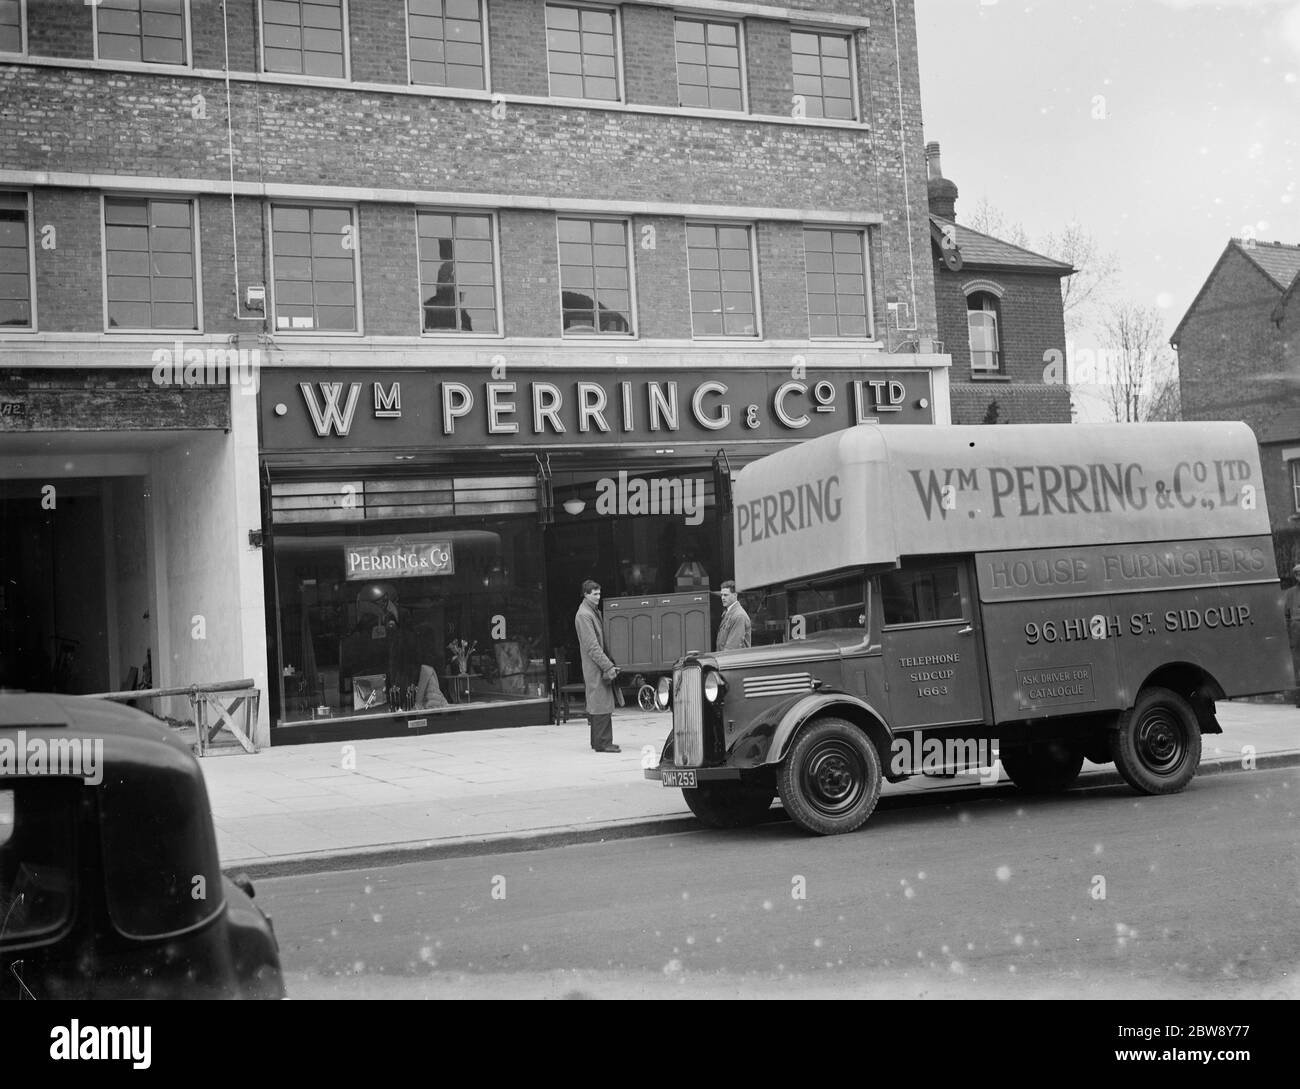 A Bedford truck belonging to W Perring and Co Ltd , the house furnishers . Workers are loading a cupboard onto the truck at their the company 's store in Sidcup , Kent . 1936 . Stock Photo